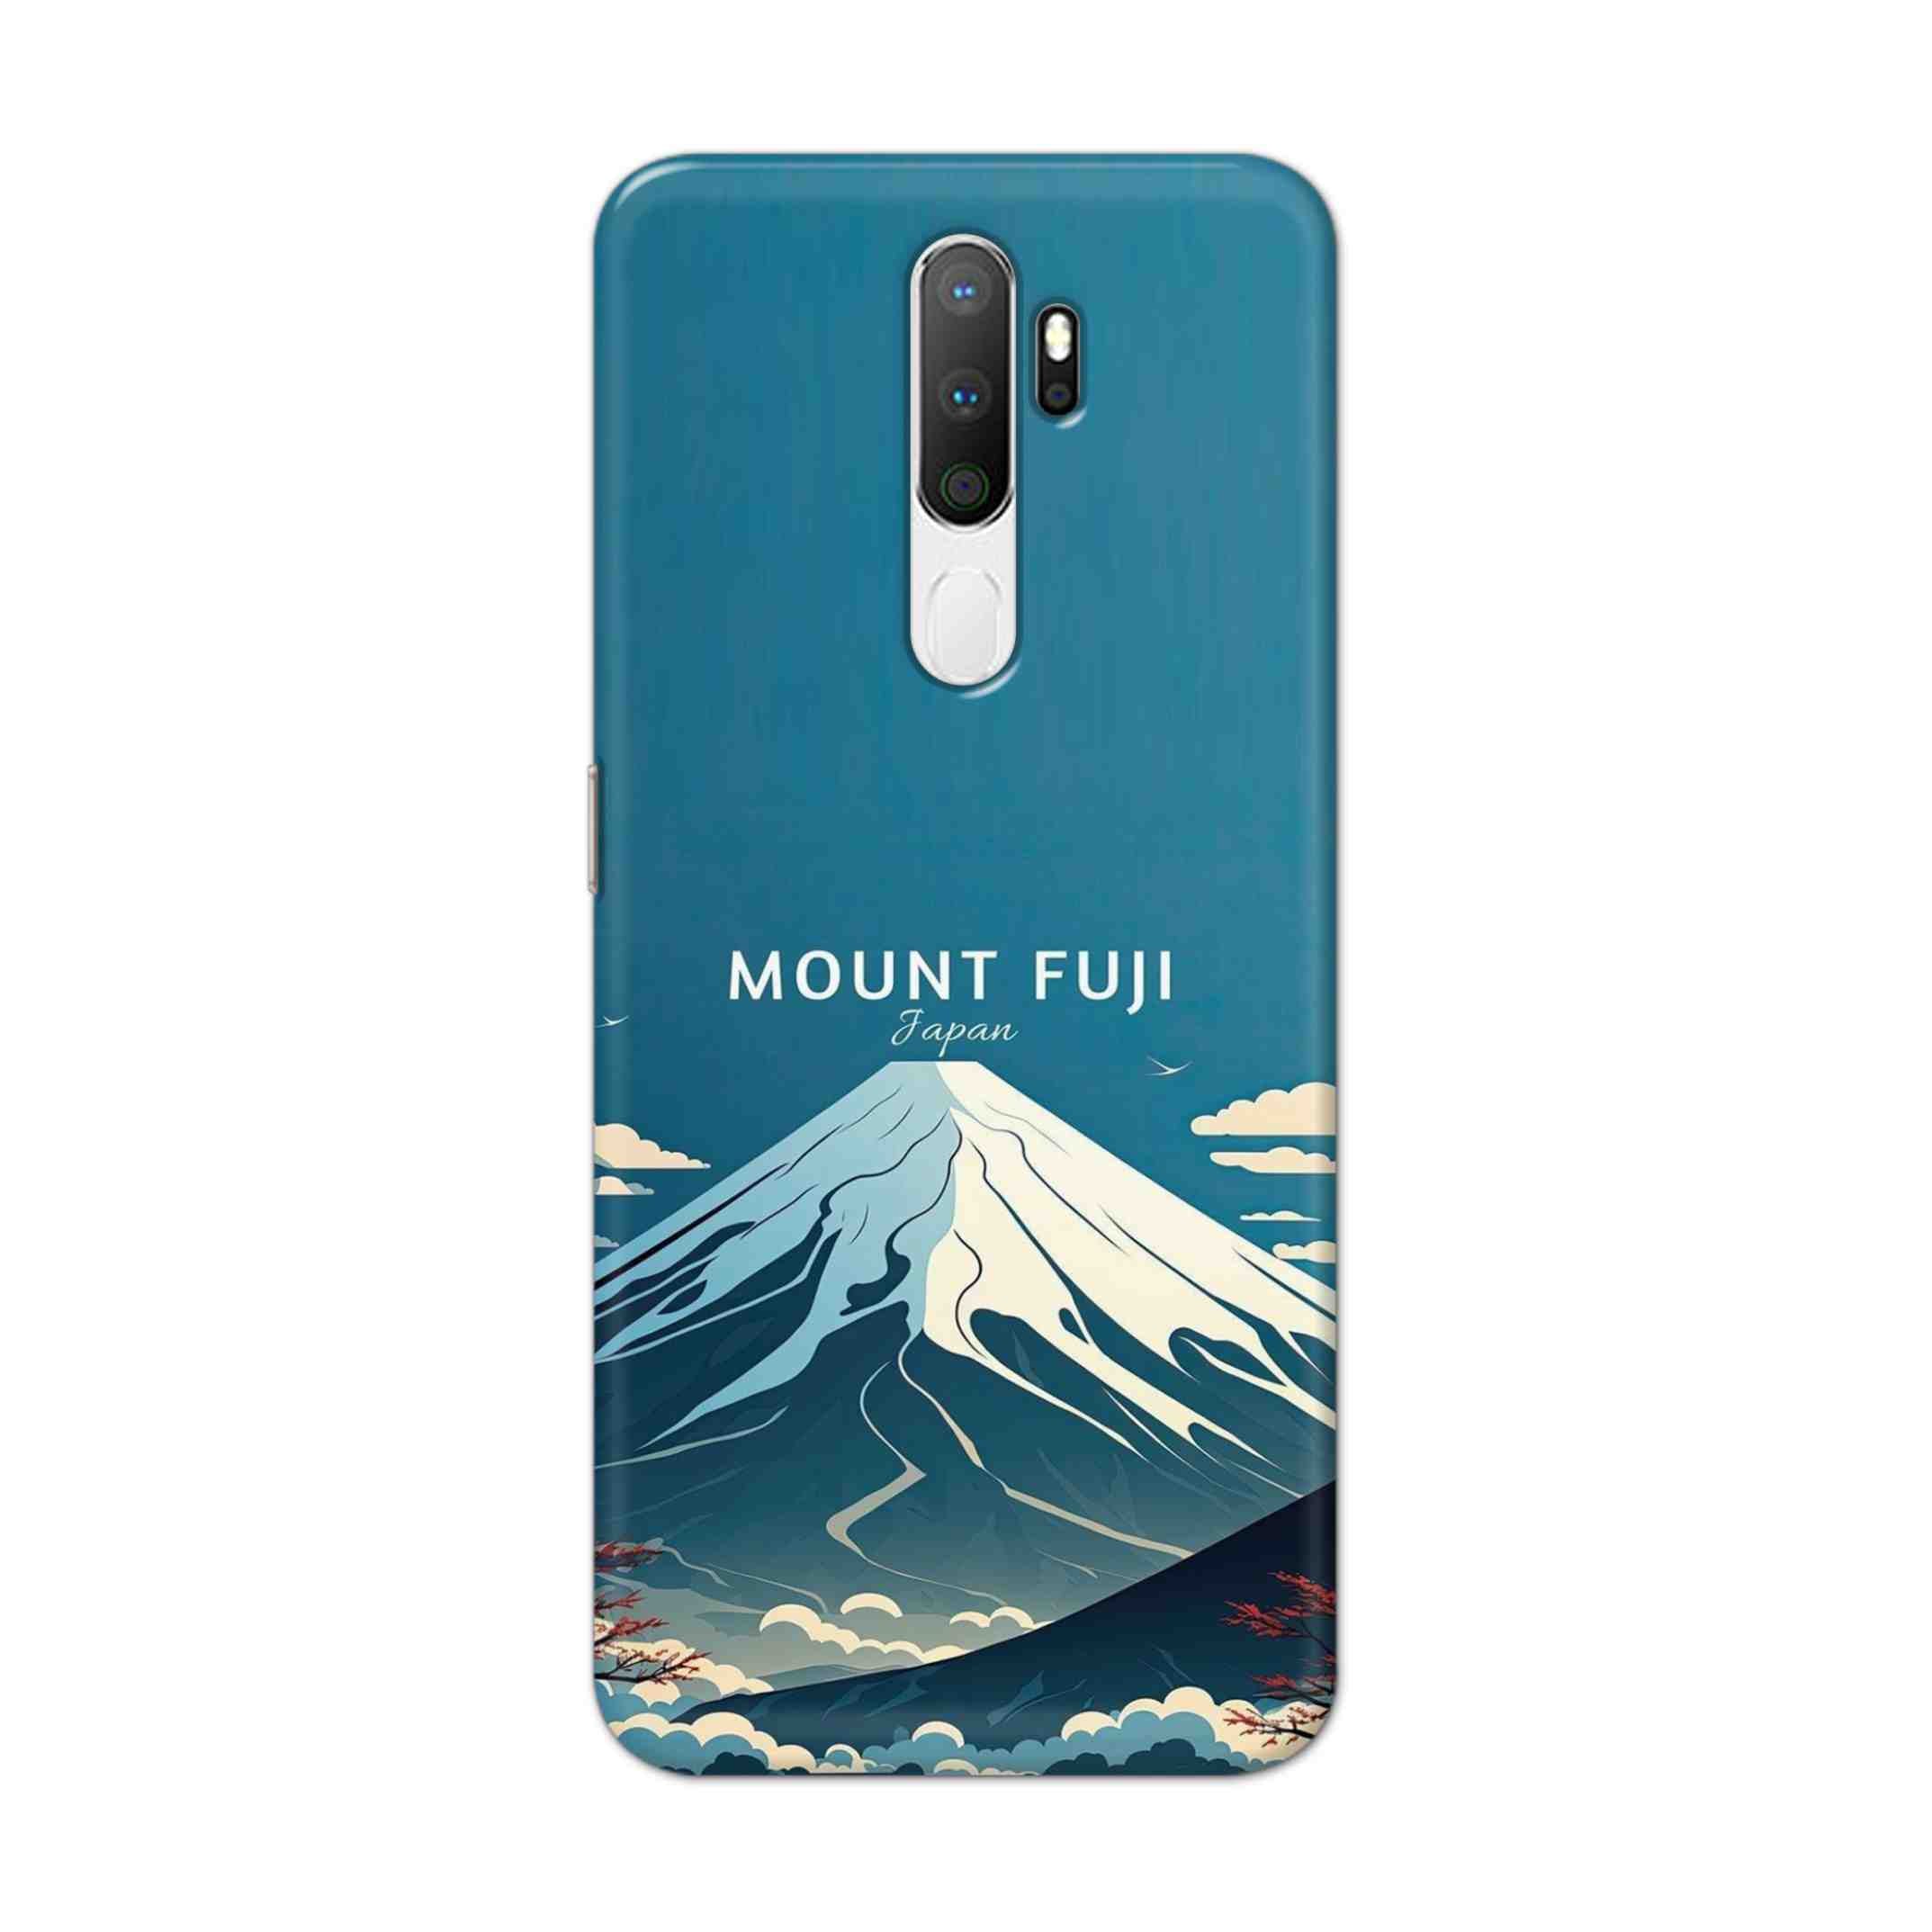 Buy Mount Fuji Hard Back Mobile Phone Case Cover For Oppo A5 (2020) Online